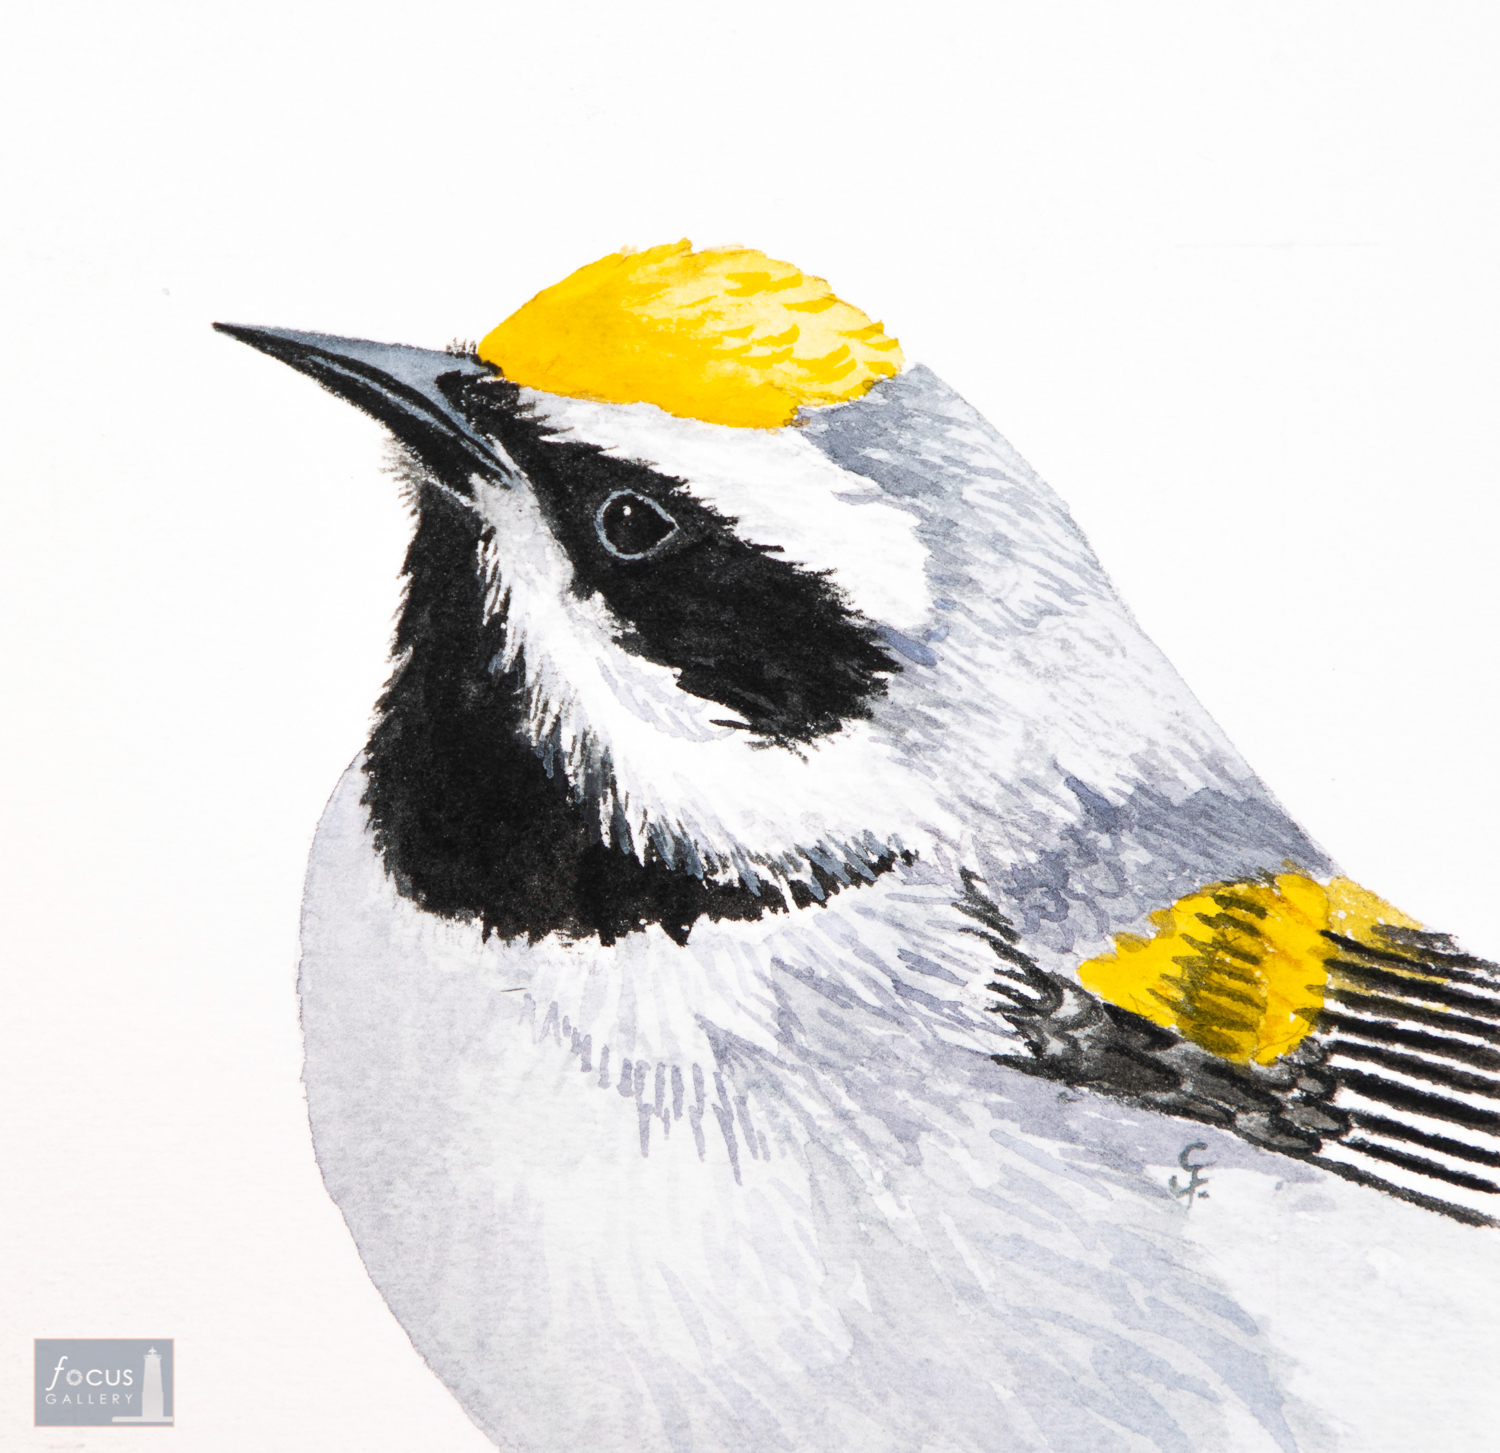 Original watercolor painting of the detail of a Golden-winged Warbler bird's head and feathers.